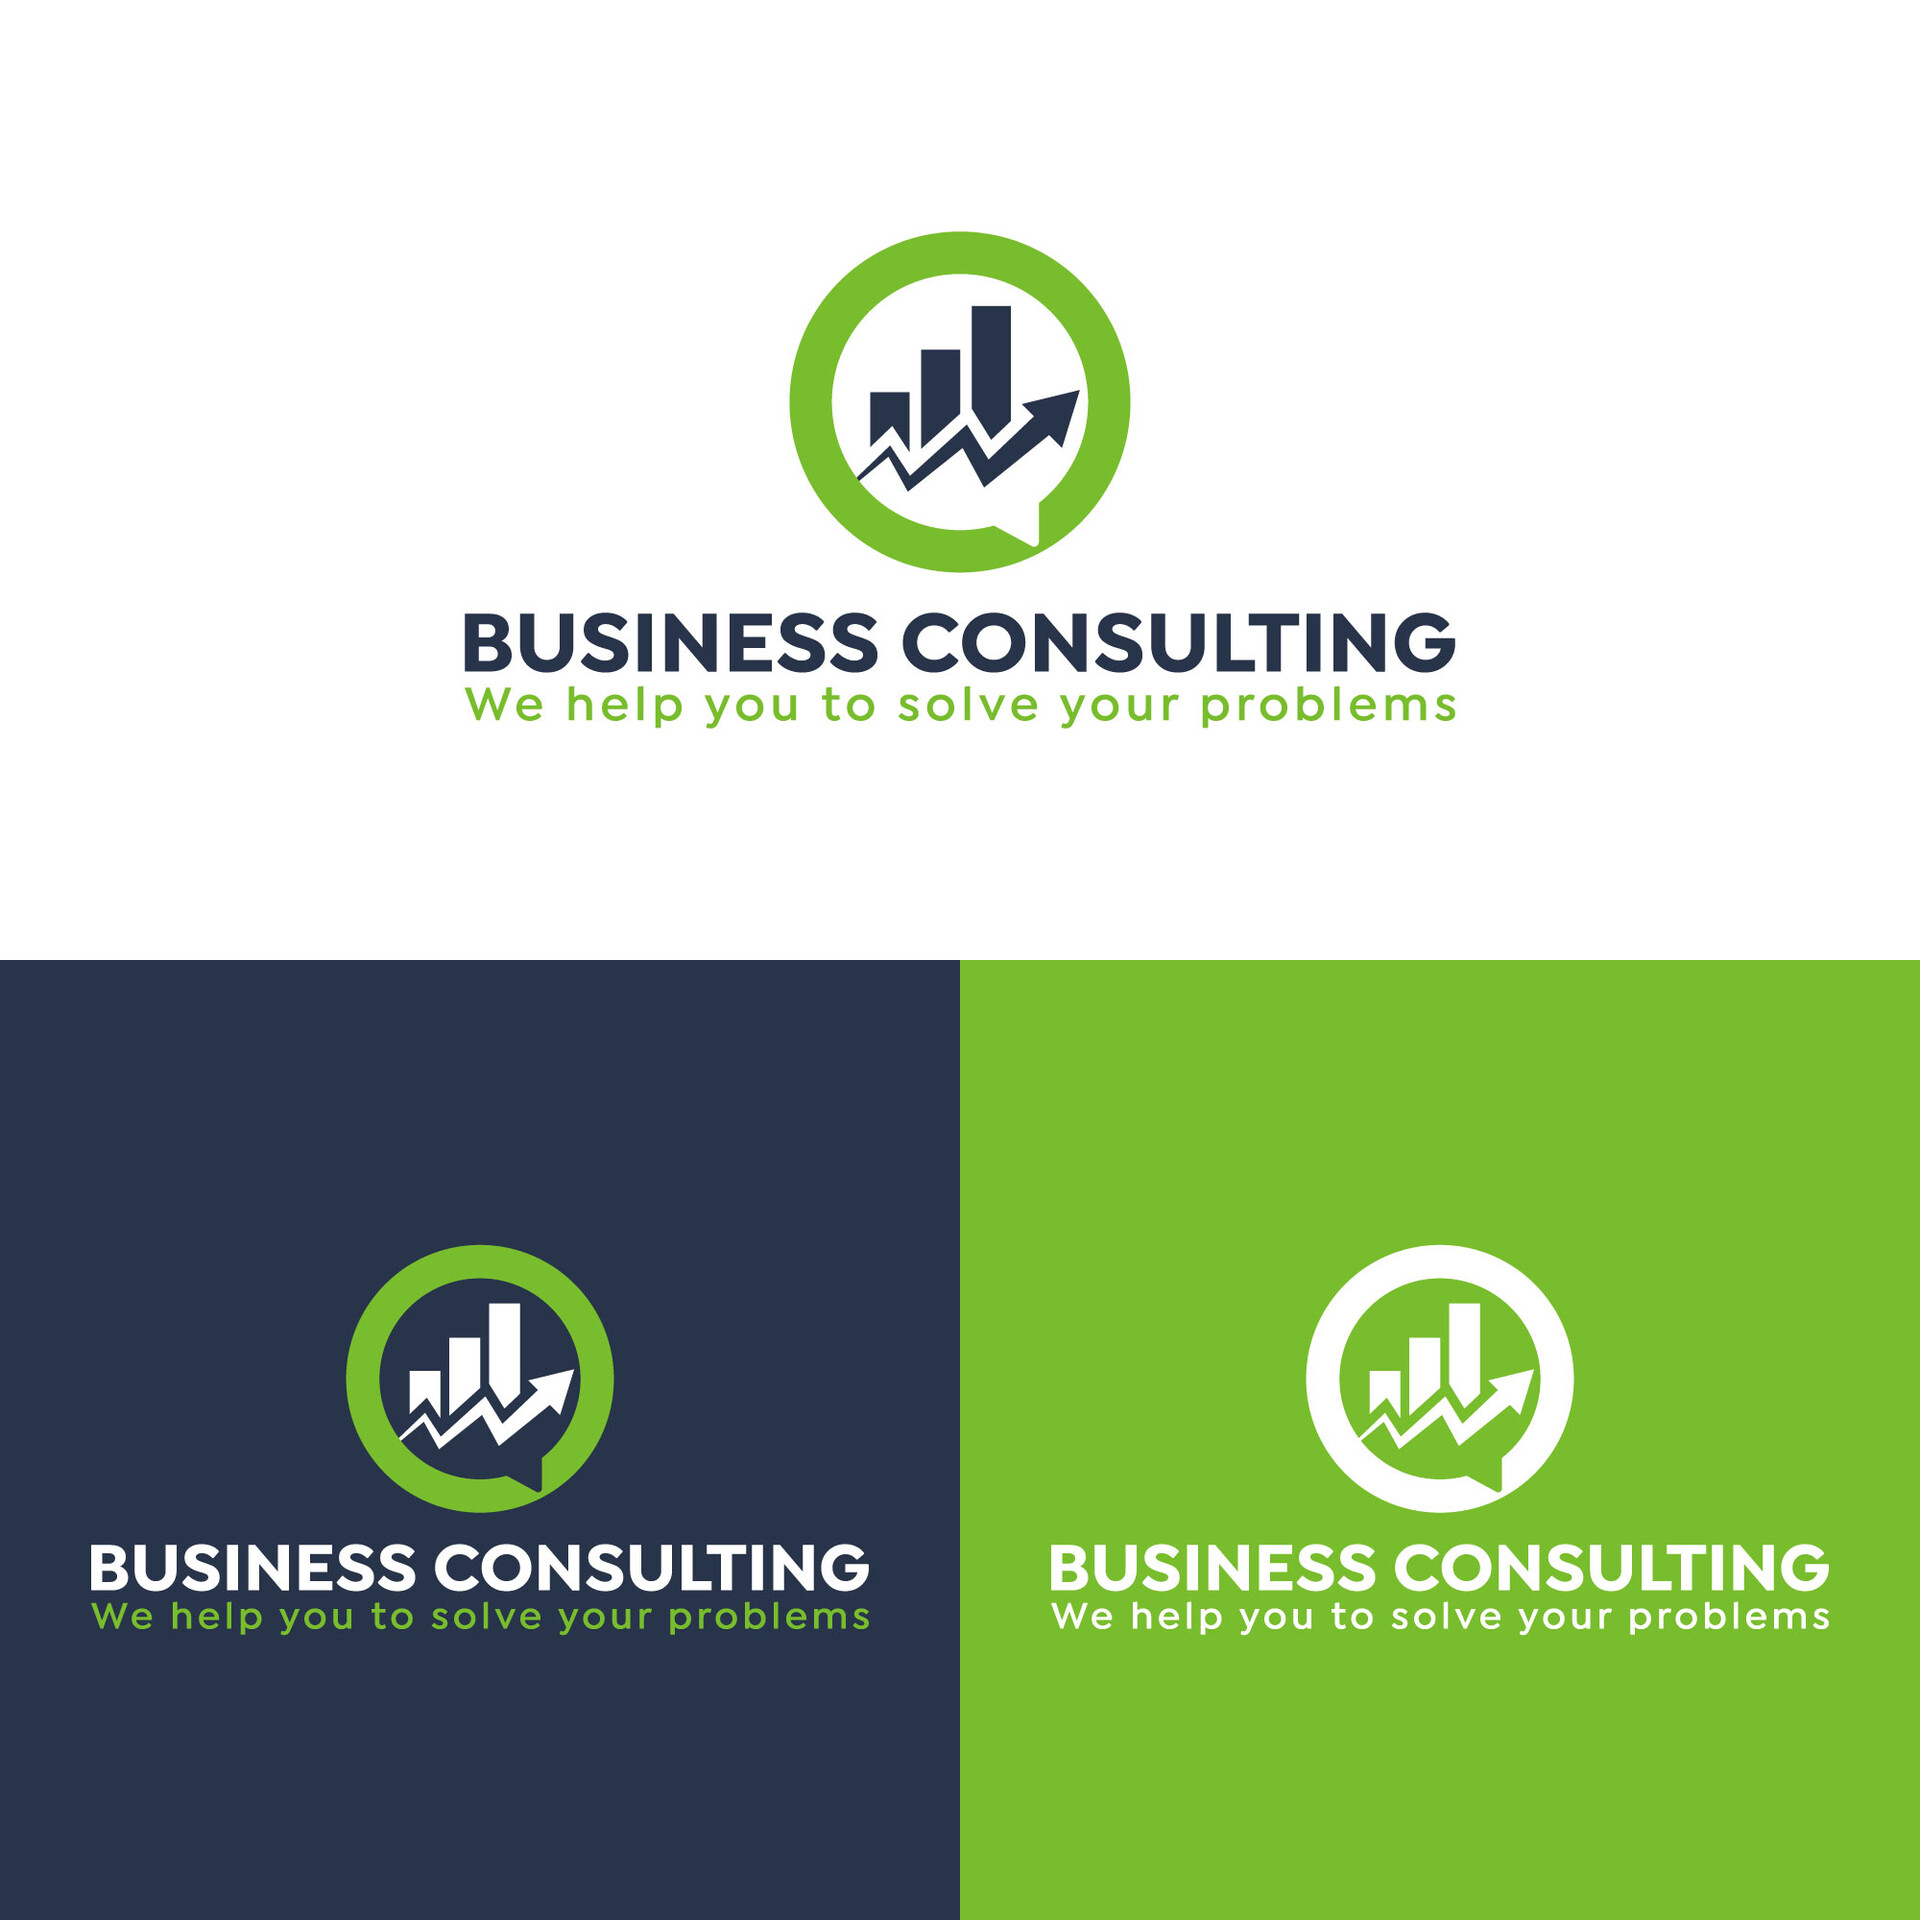 Create Business Logo Designs And Consulting Logos - vrogue.co